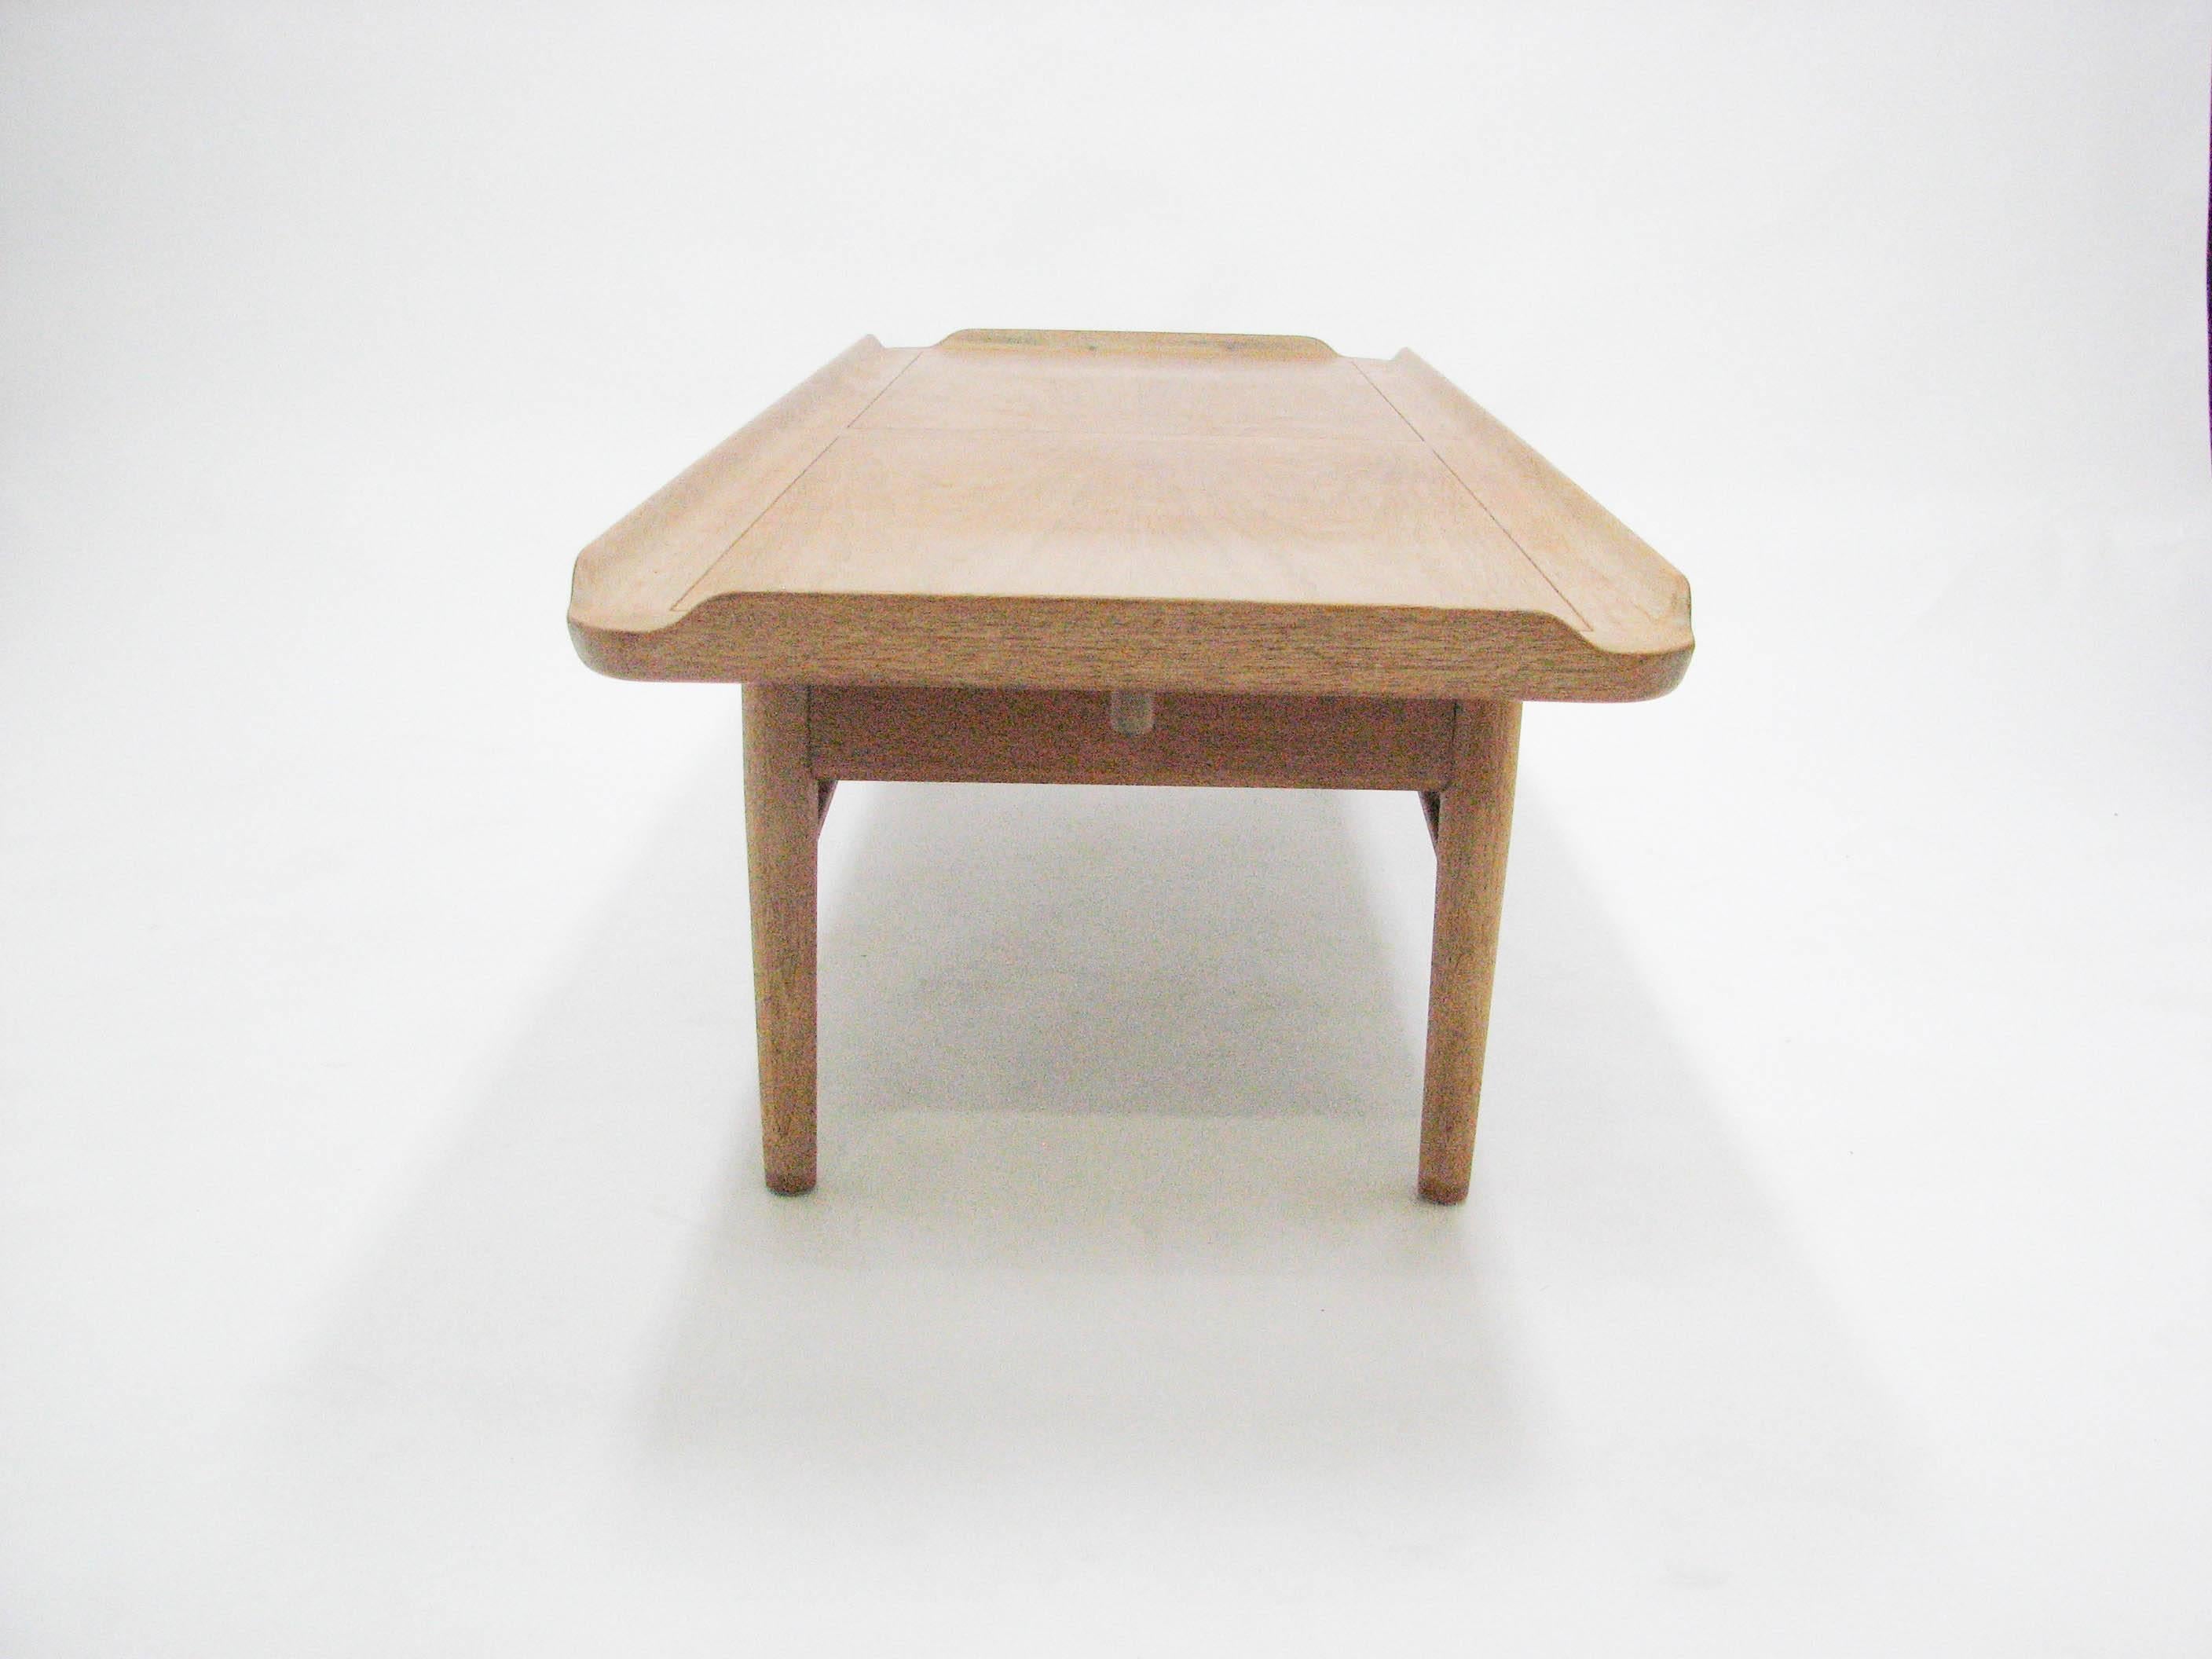 Mid-20th Century Rare Finn Juhl Cocktail Table or Bench for Baker Furniture Company